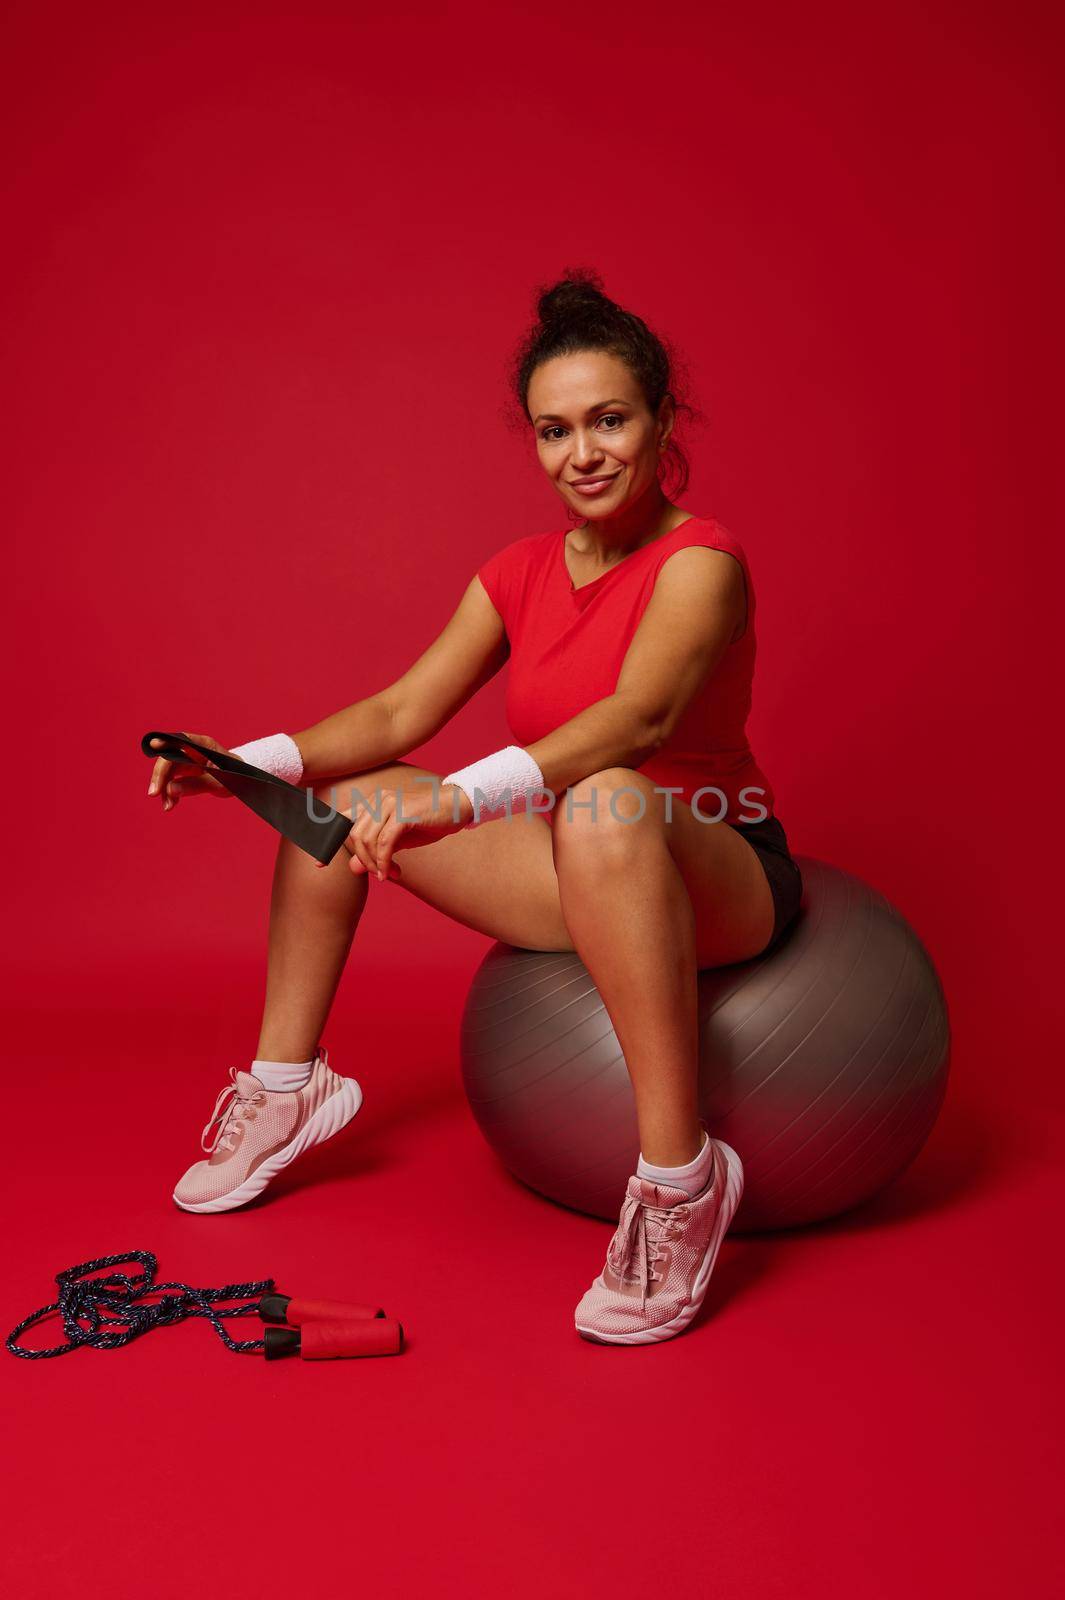 Hispanic beautiful smiling athletic woman holding elastic fitness band and sitting on fitness ball after exercising isolated on red background. Concept of slimness, healthy lifestyle and workout.